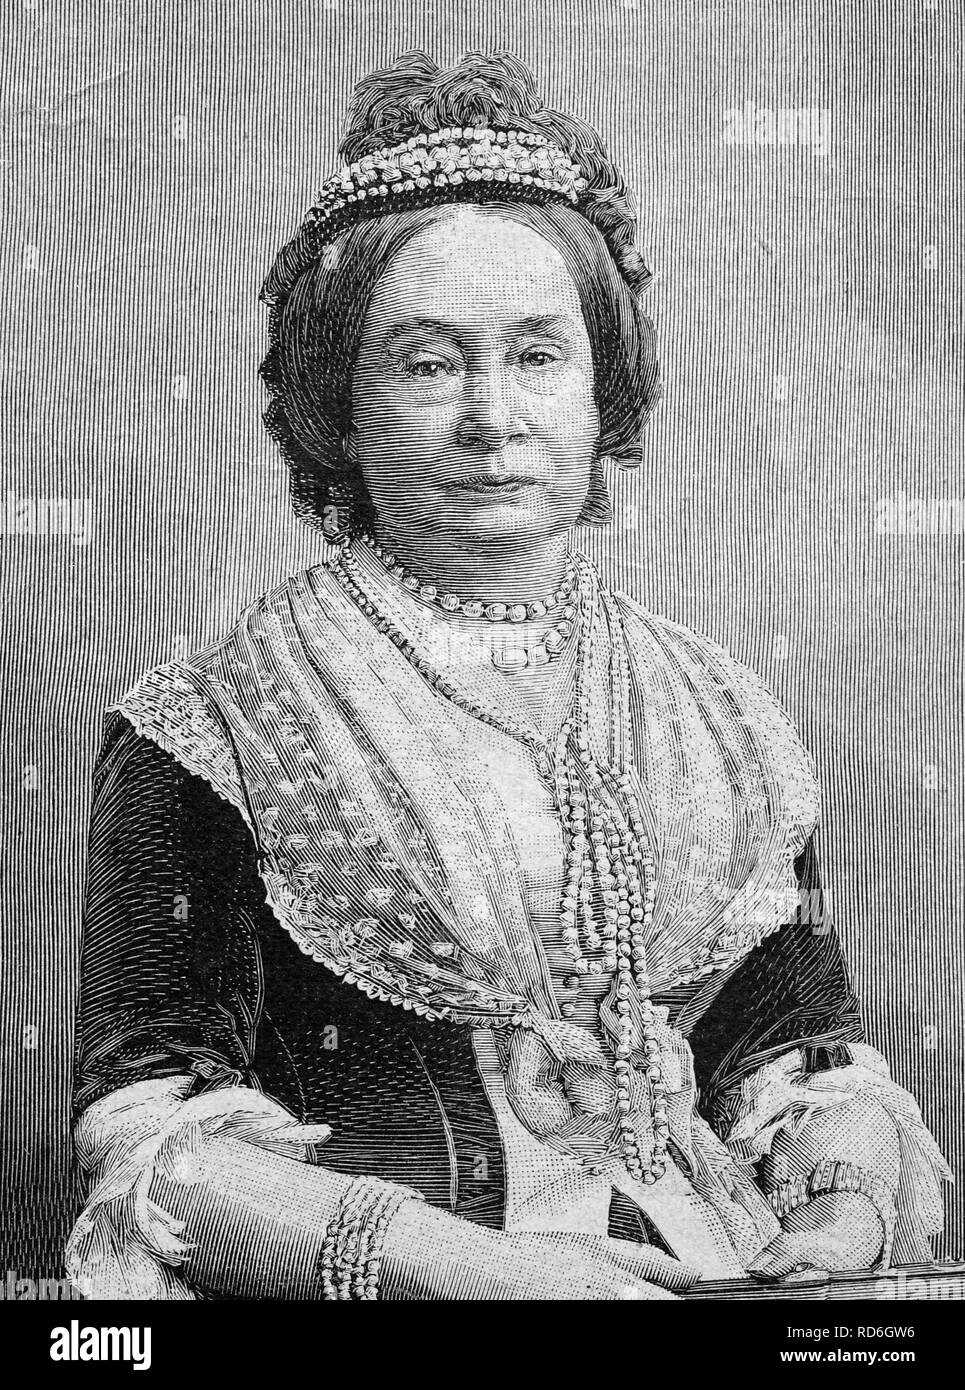 Princess Sophie of the Netherlands, wife of Charles Alexander, Grand Duke of Saxe-Weimar-Eisenach, 1824 - 1897, historical Stock Photo